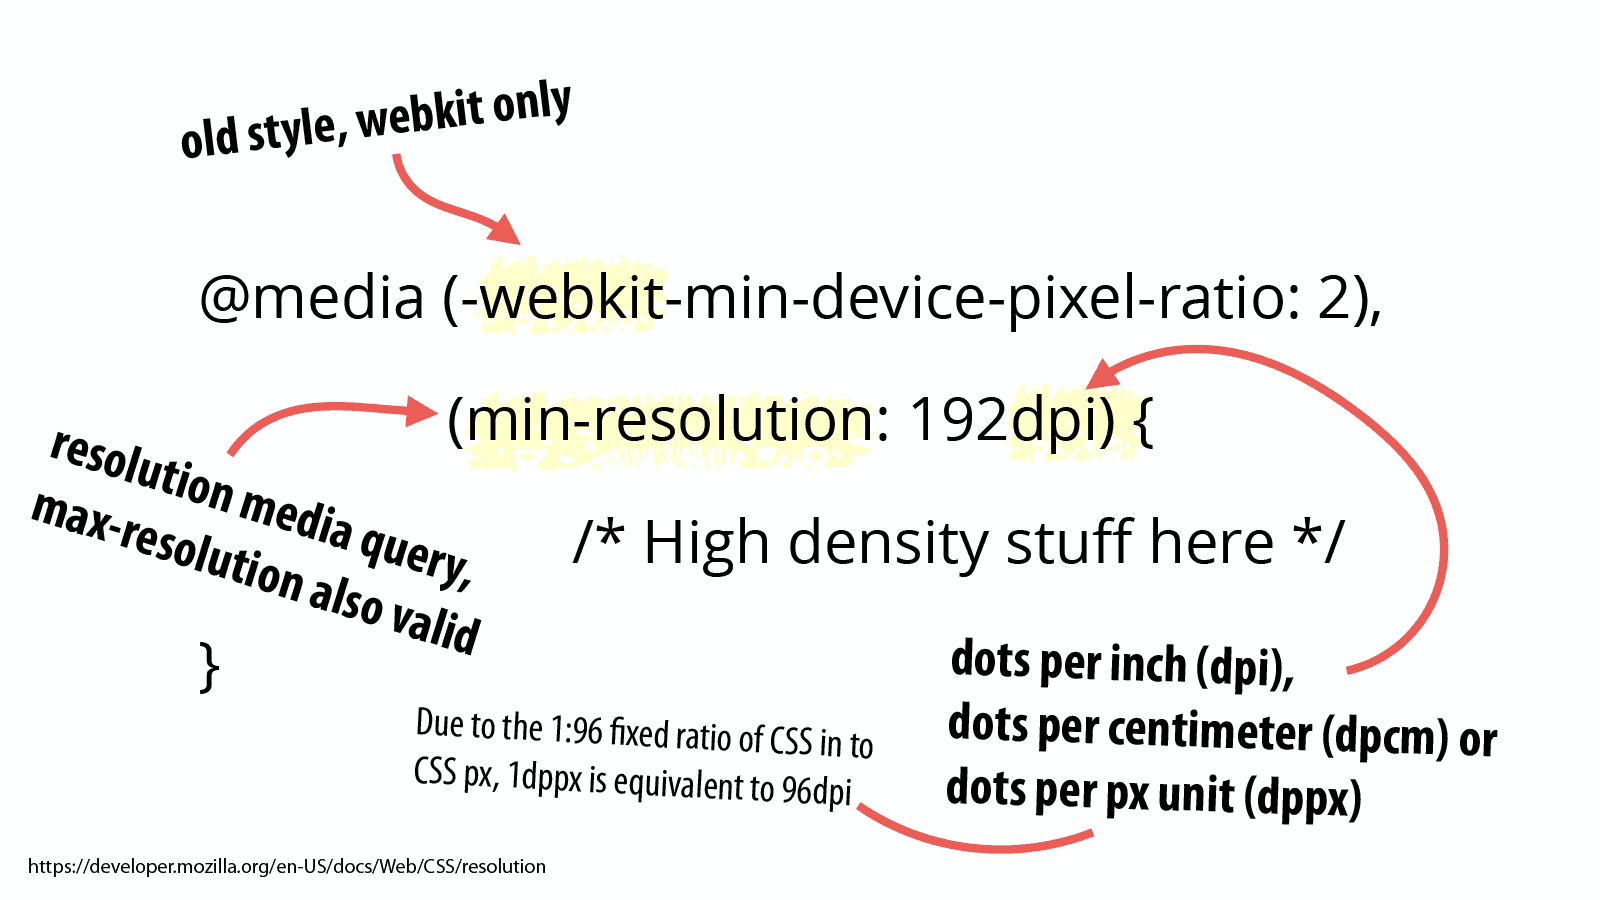 Resolution media query syntax. Repeated below.